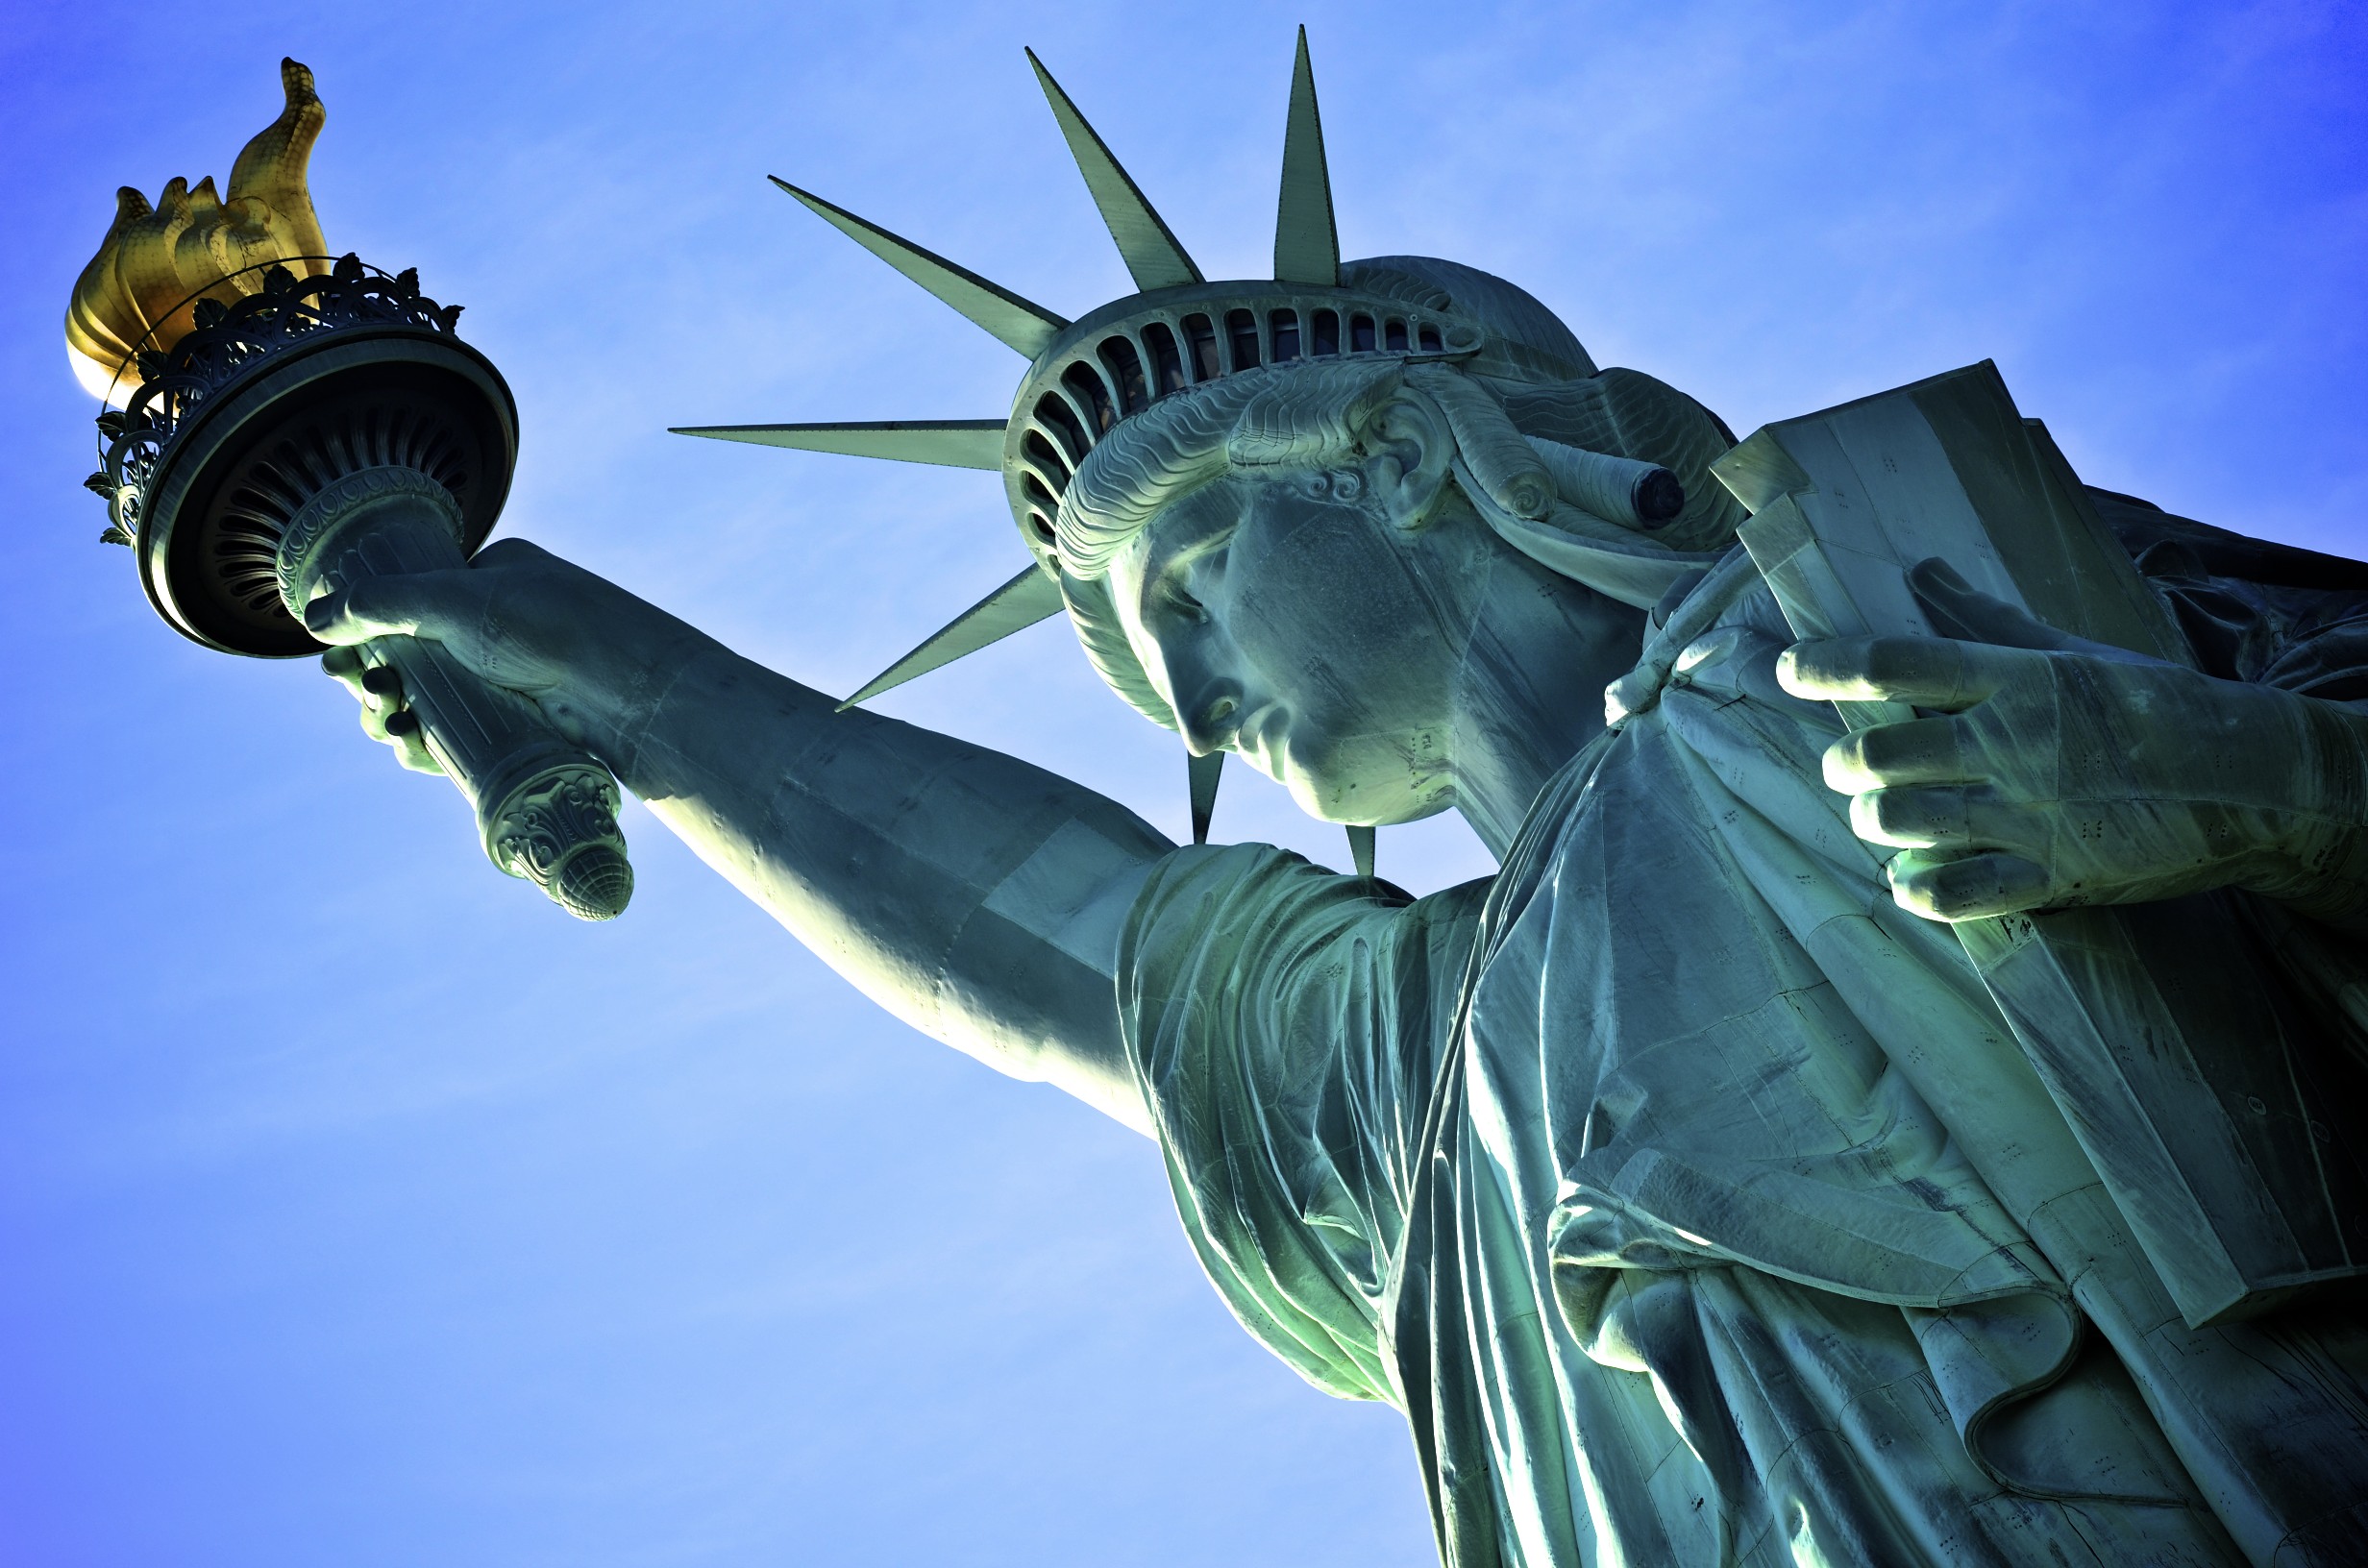 The Statue of Liberty – MajorChange